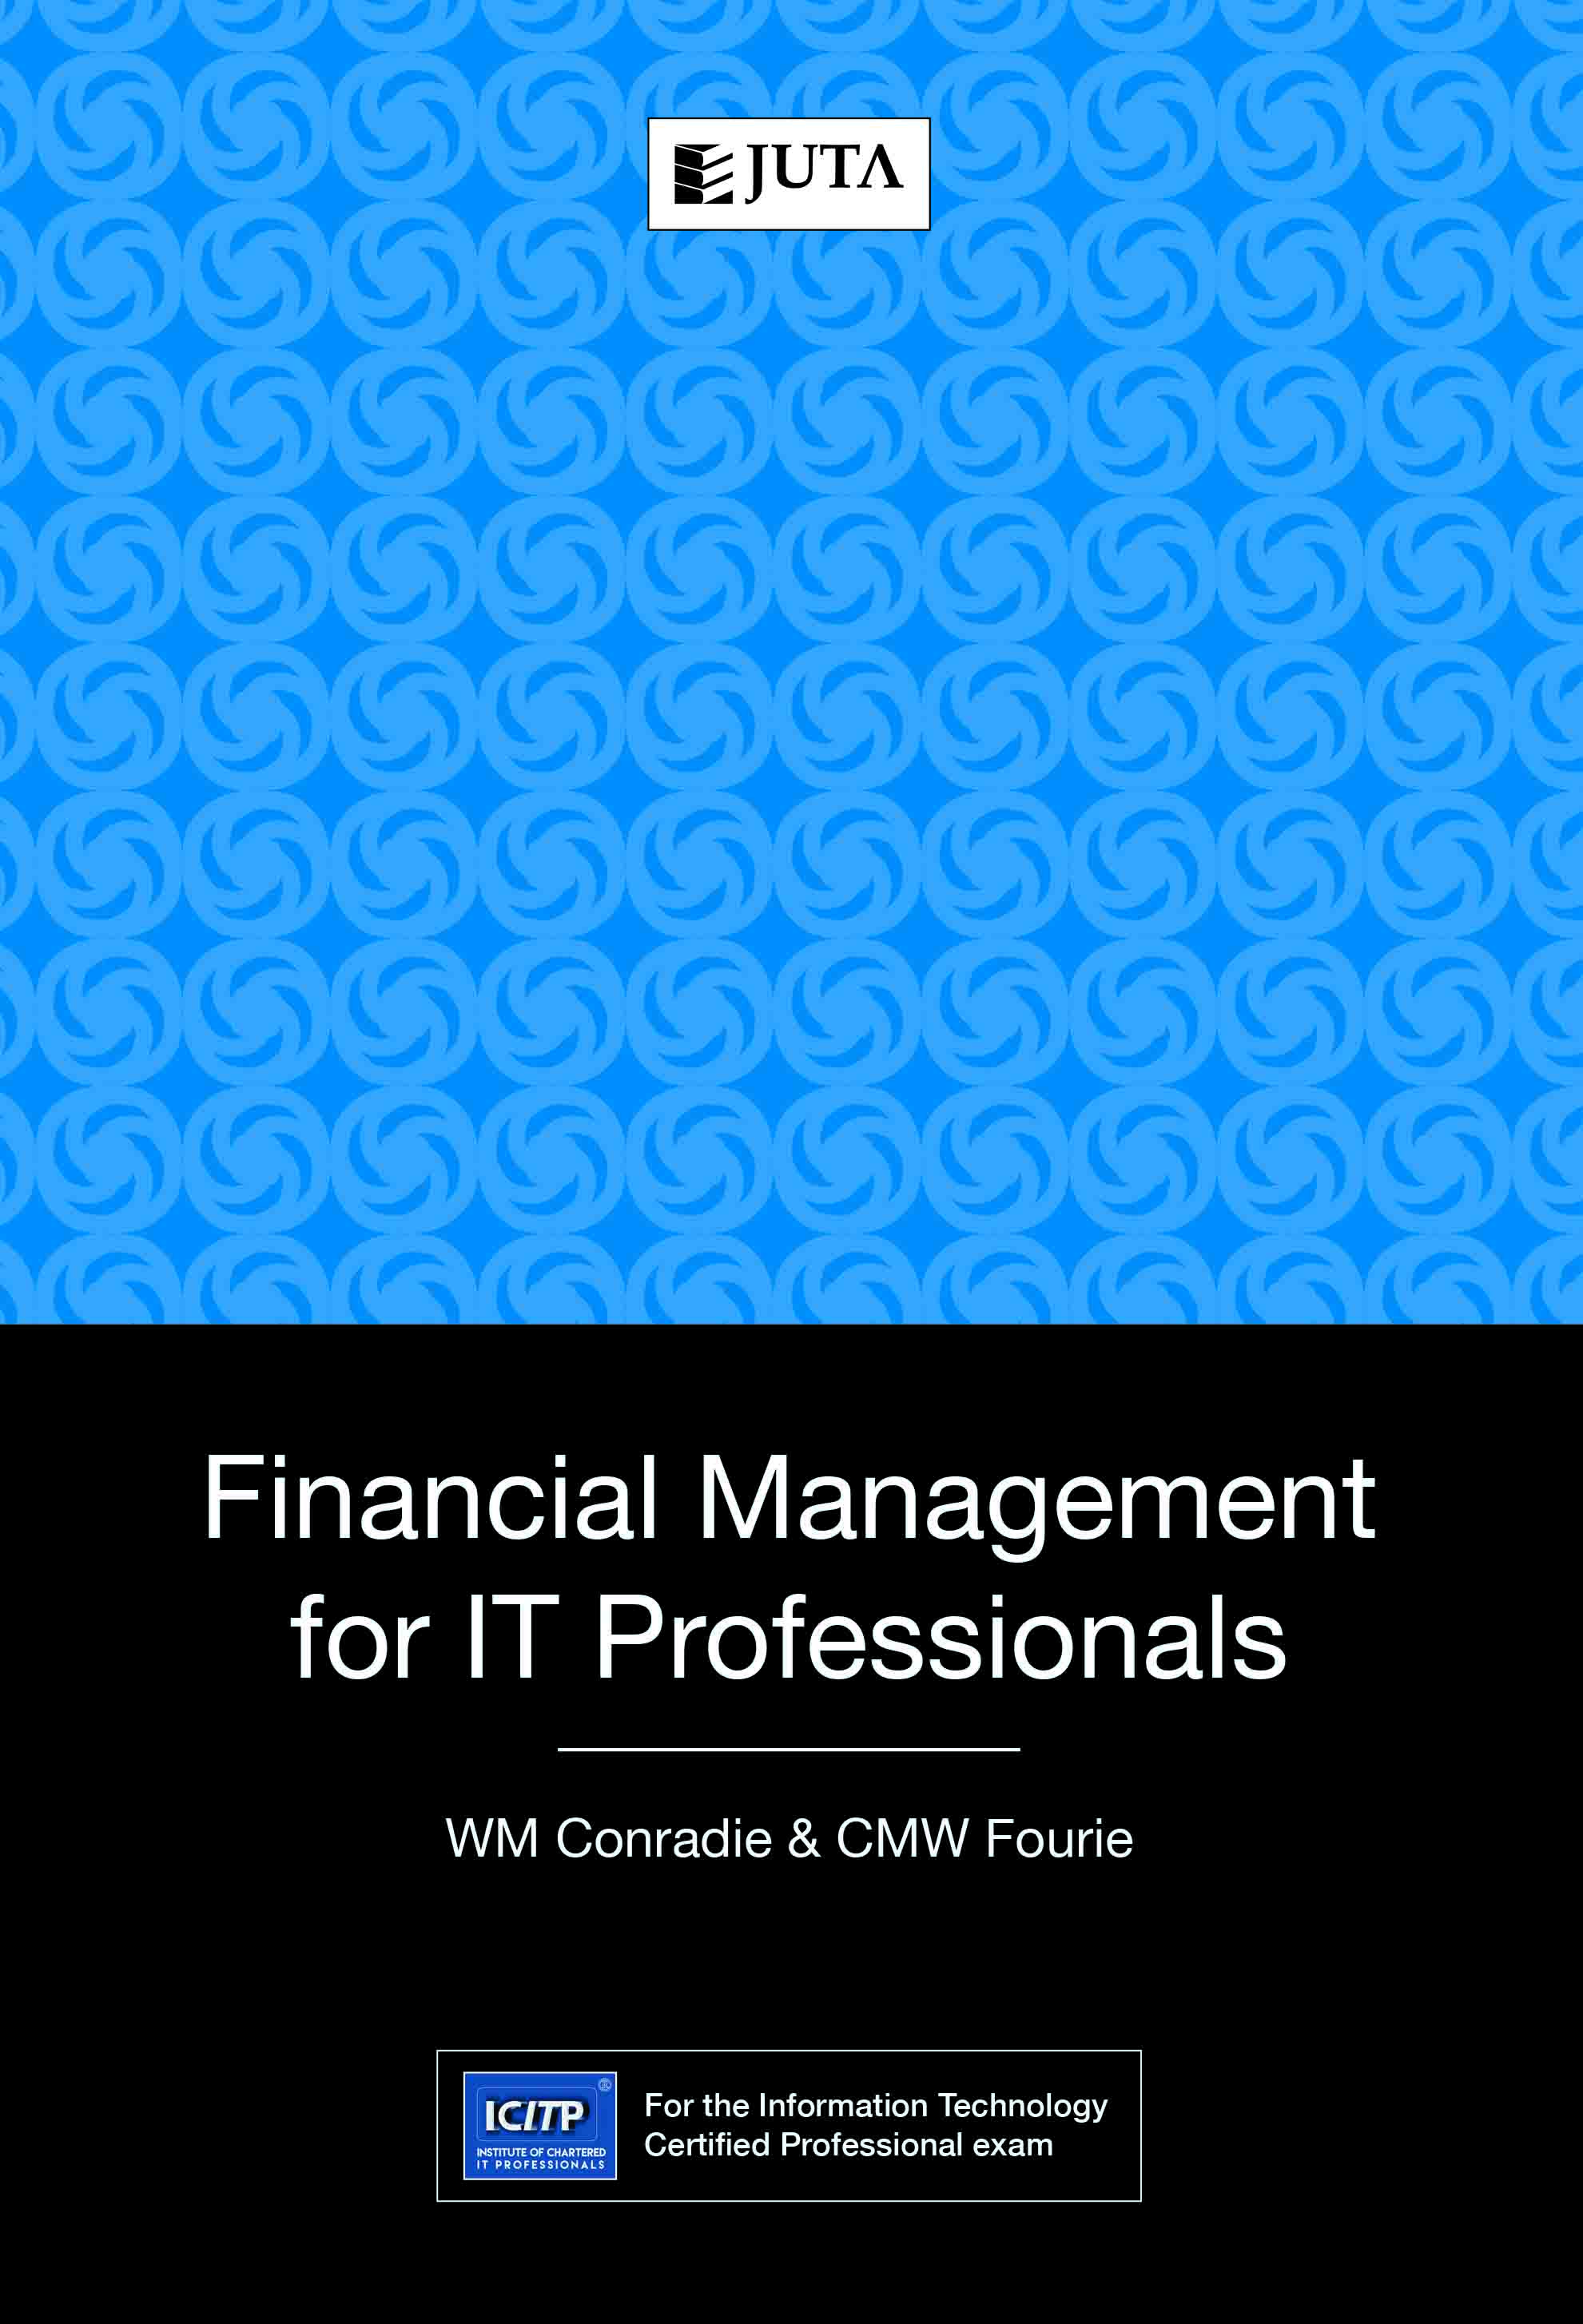 Financial Management for IT Professionals